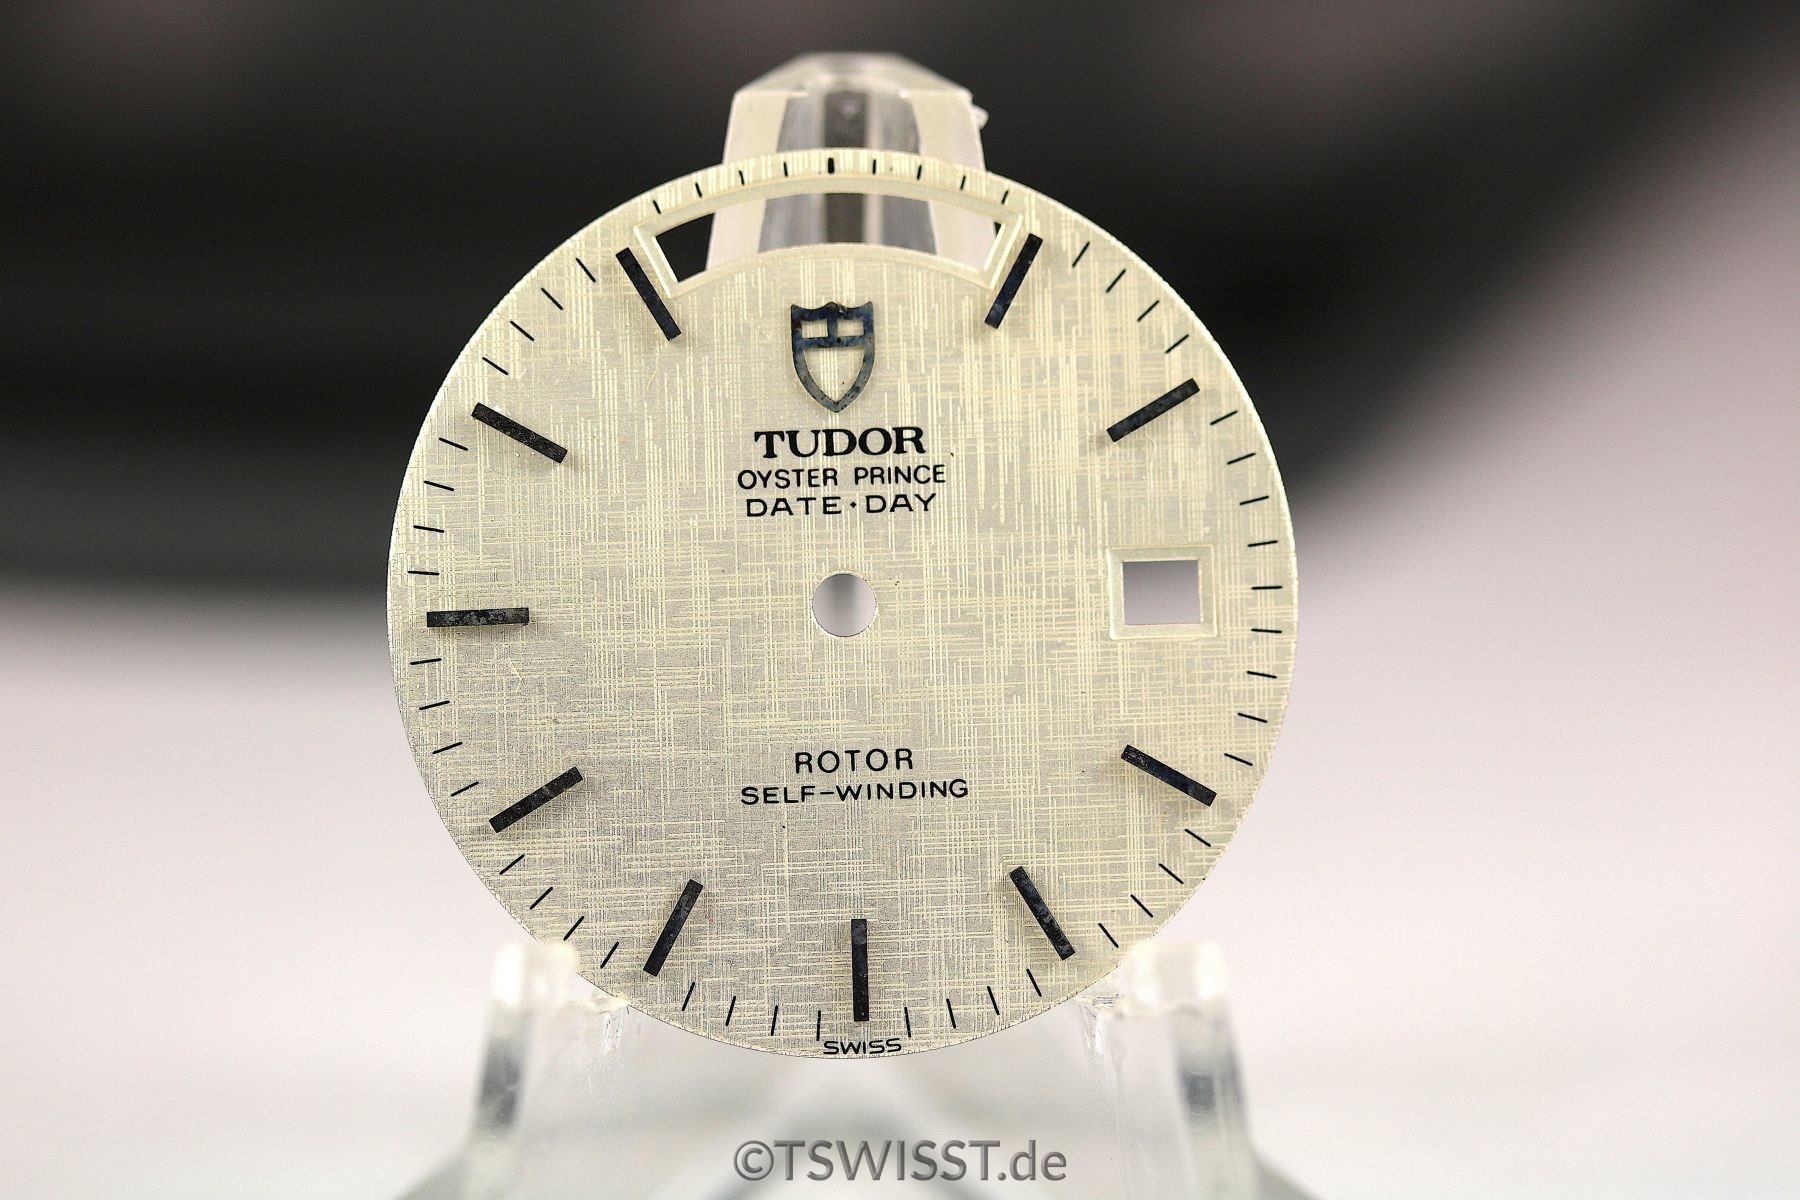 Tudor Date-day dial